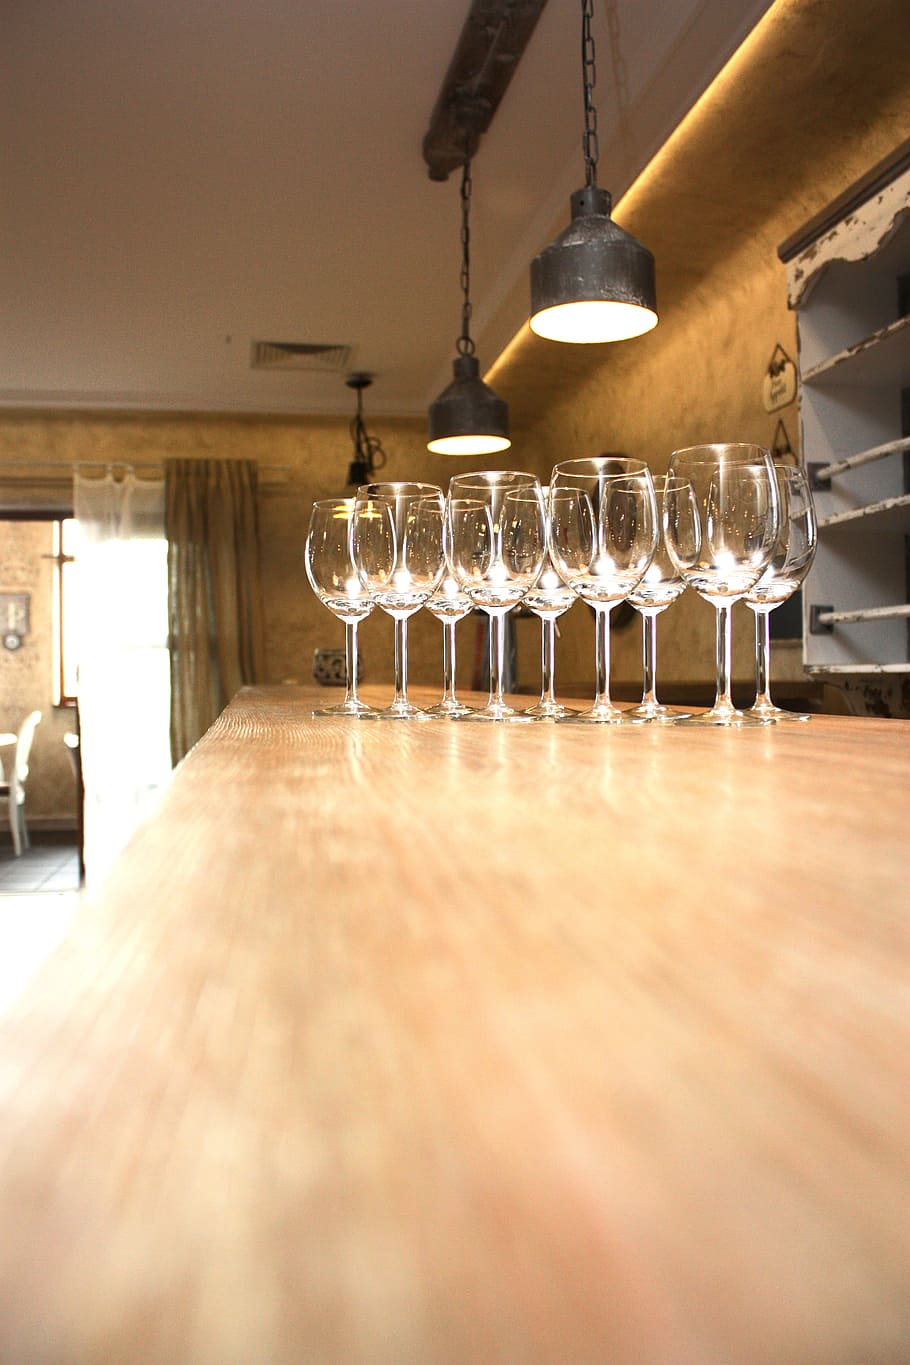 clear, wineglasses, brown, wooden, table, bar, architecture, balat wooden, pub, wine glasses